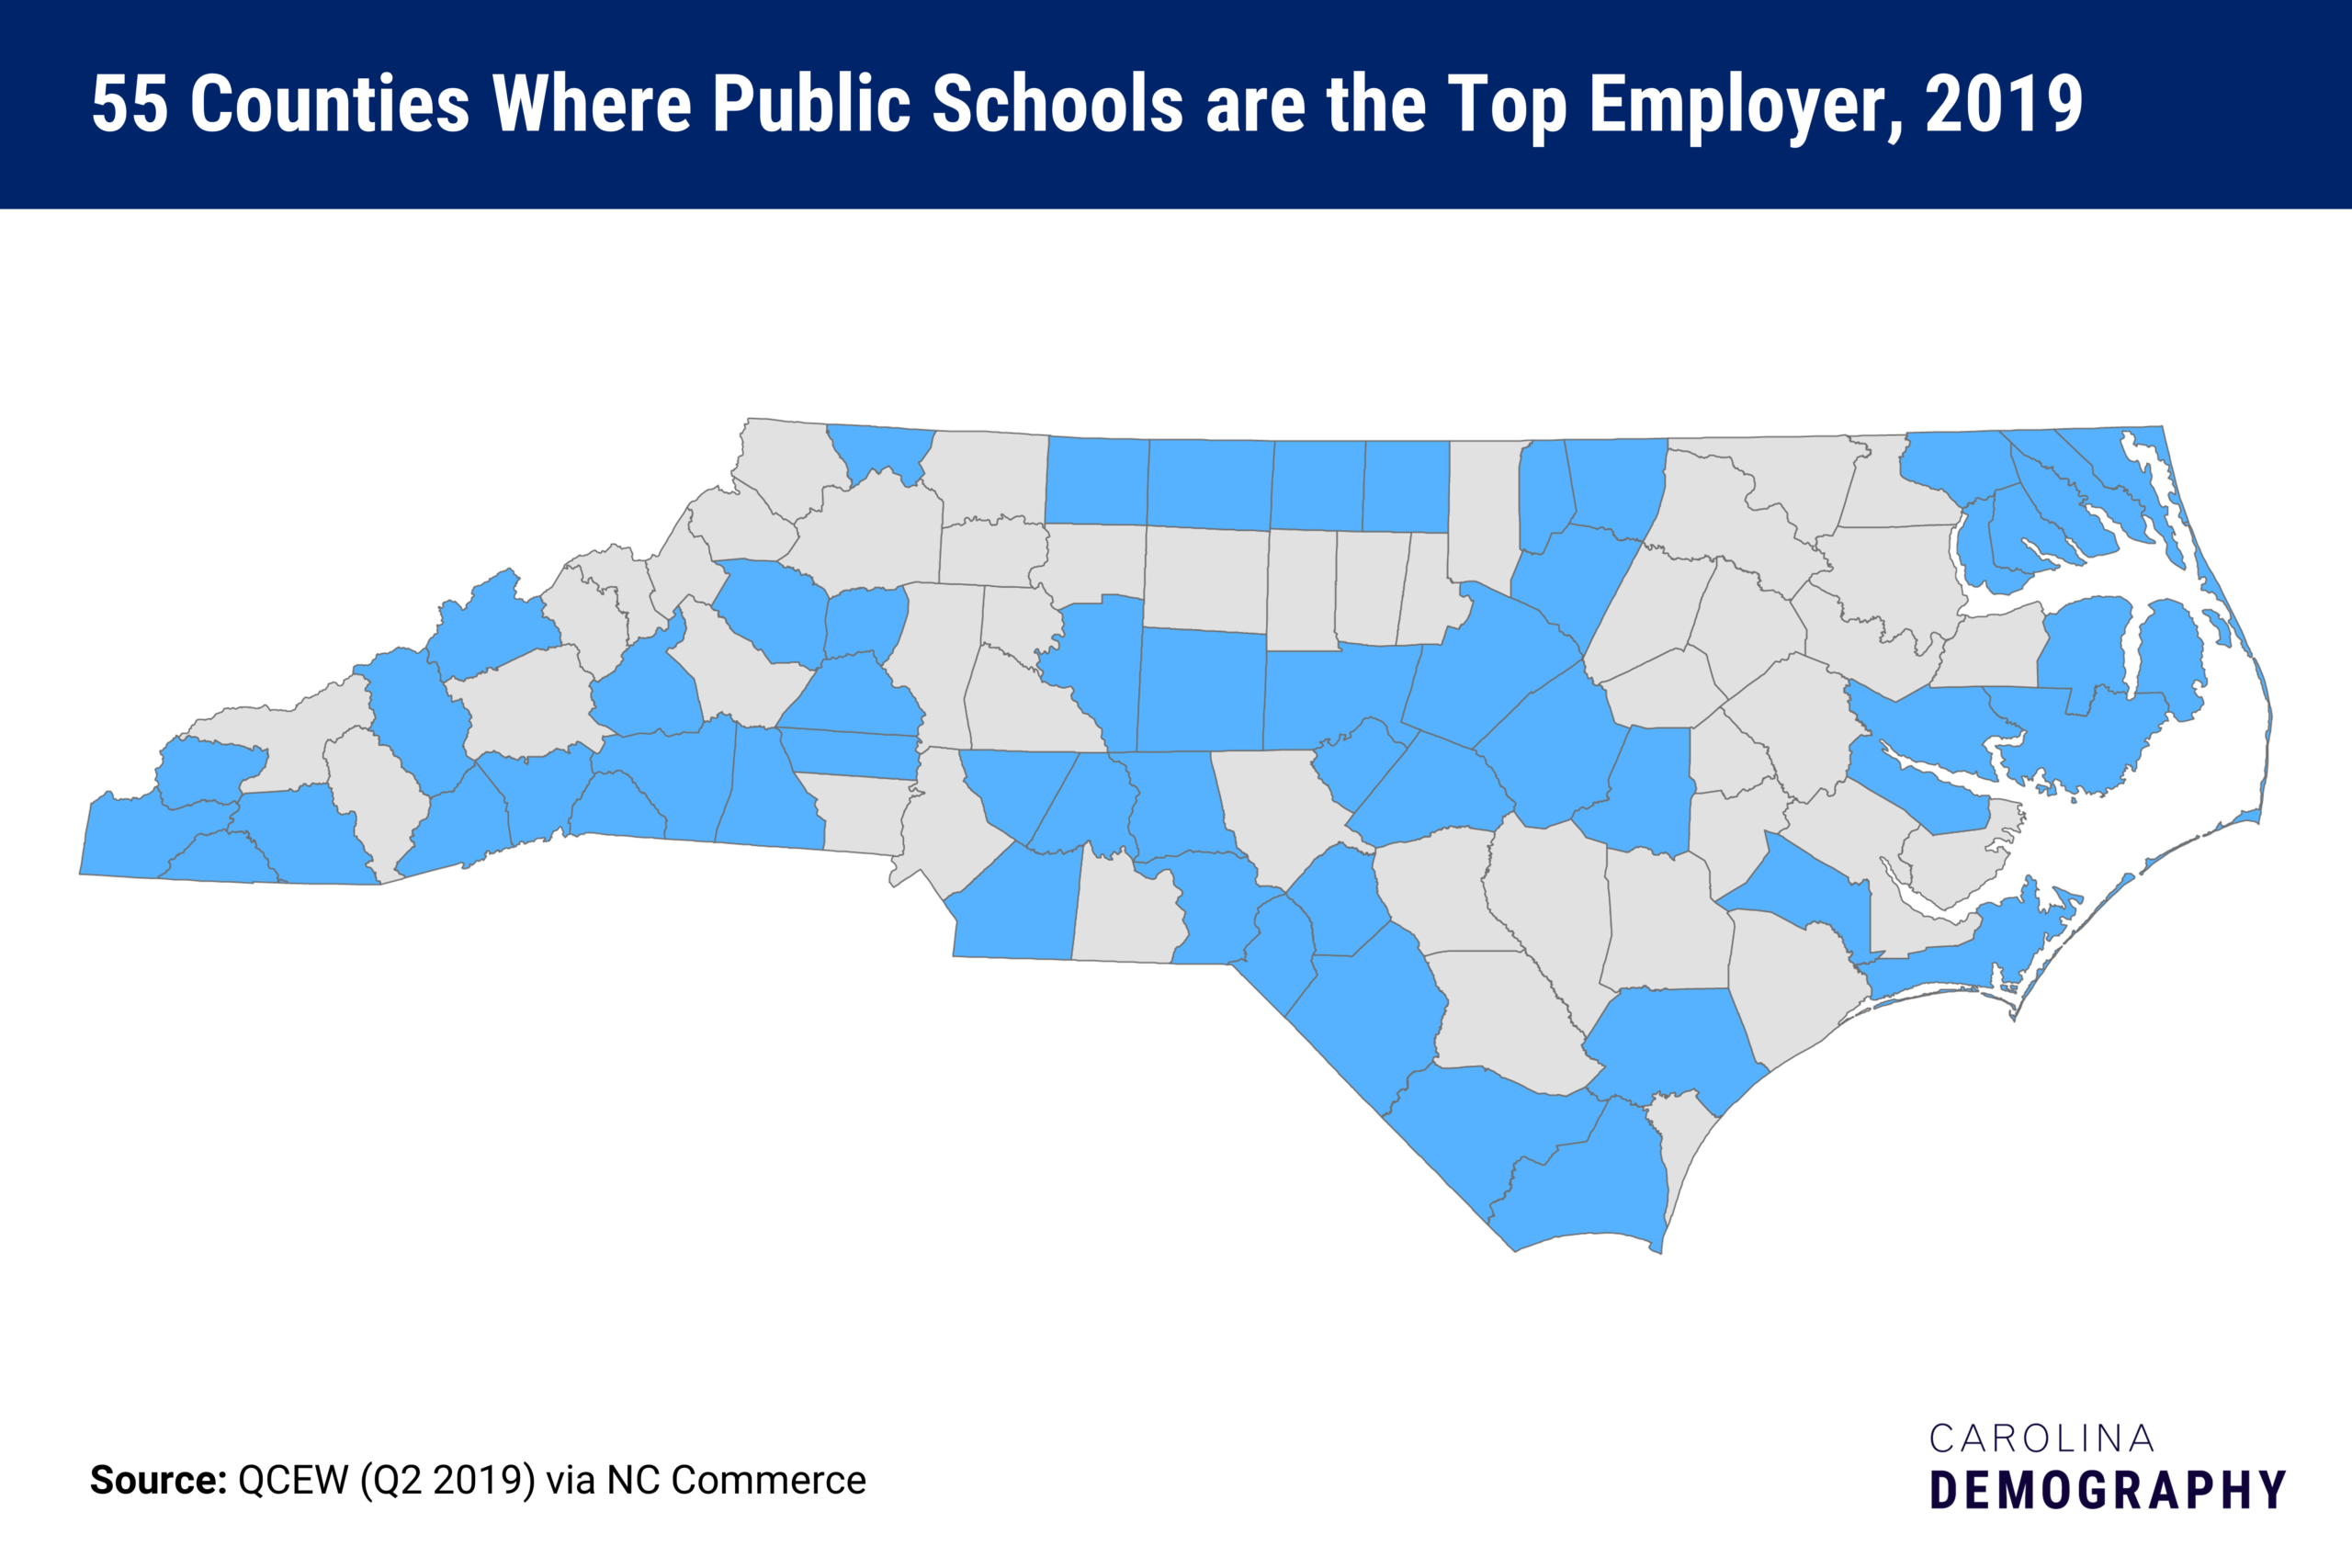 55 counties where public schools are the top employer, 2019